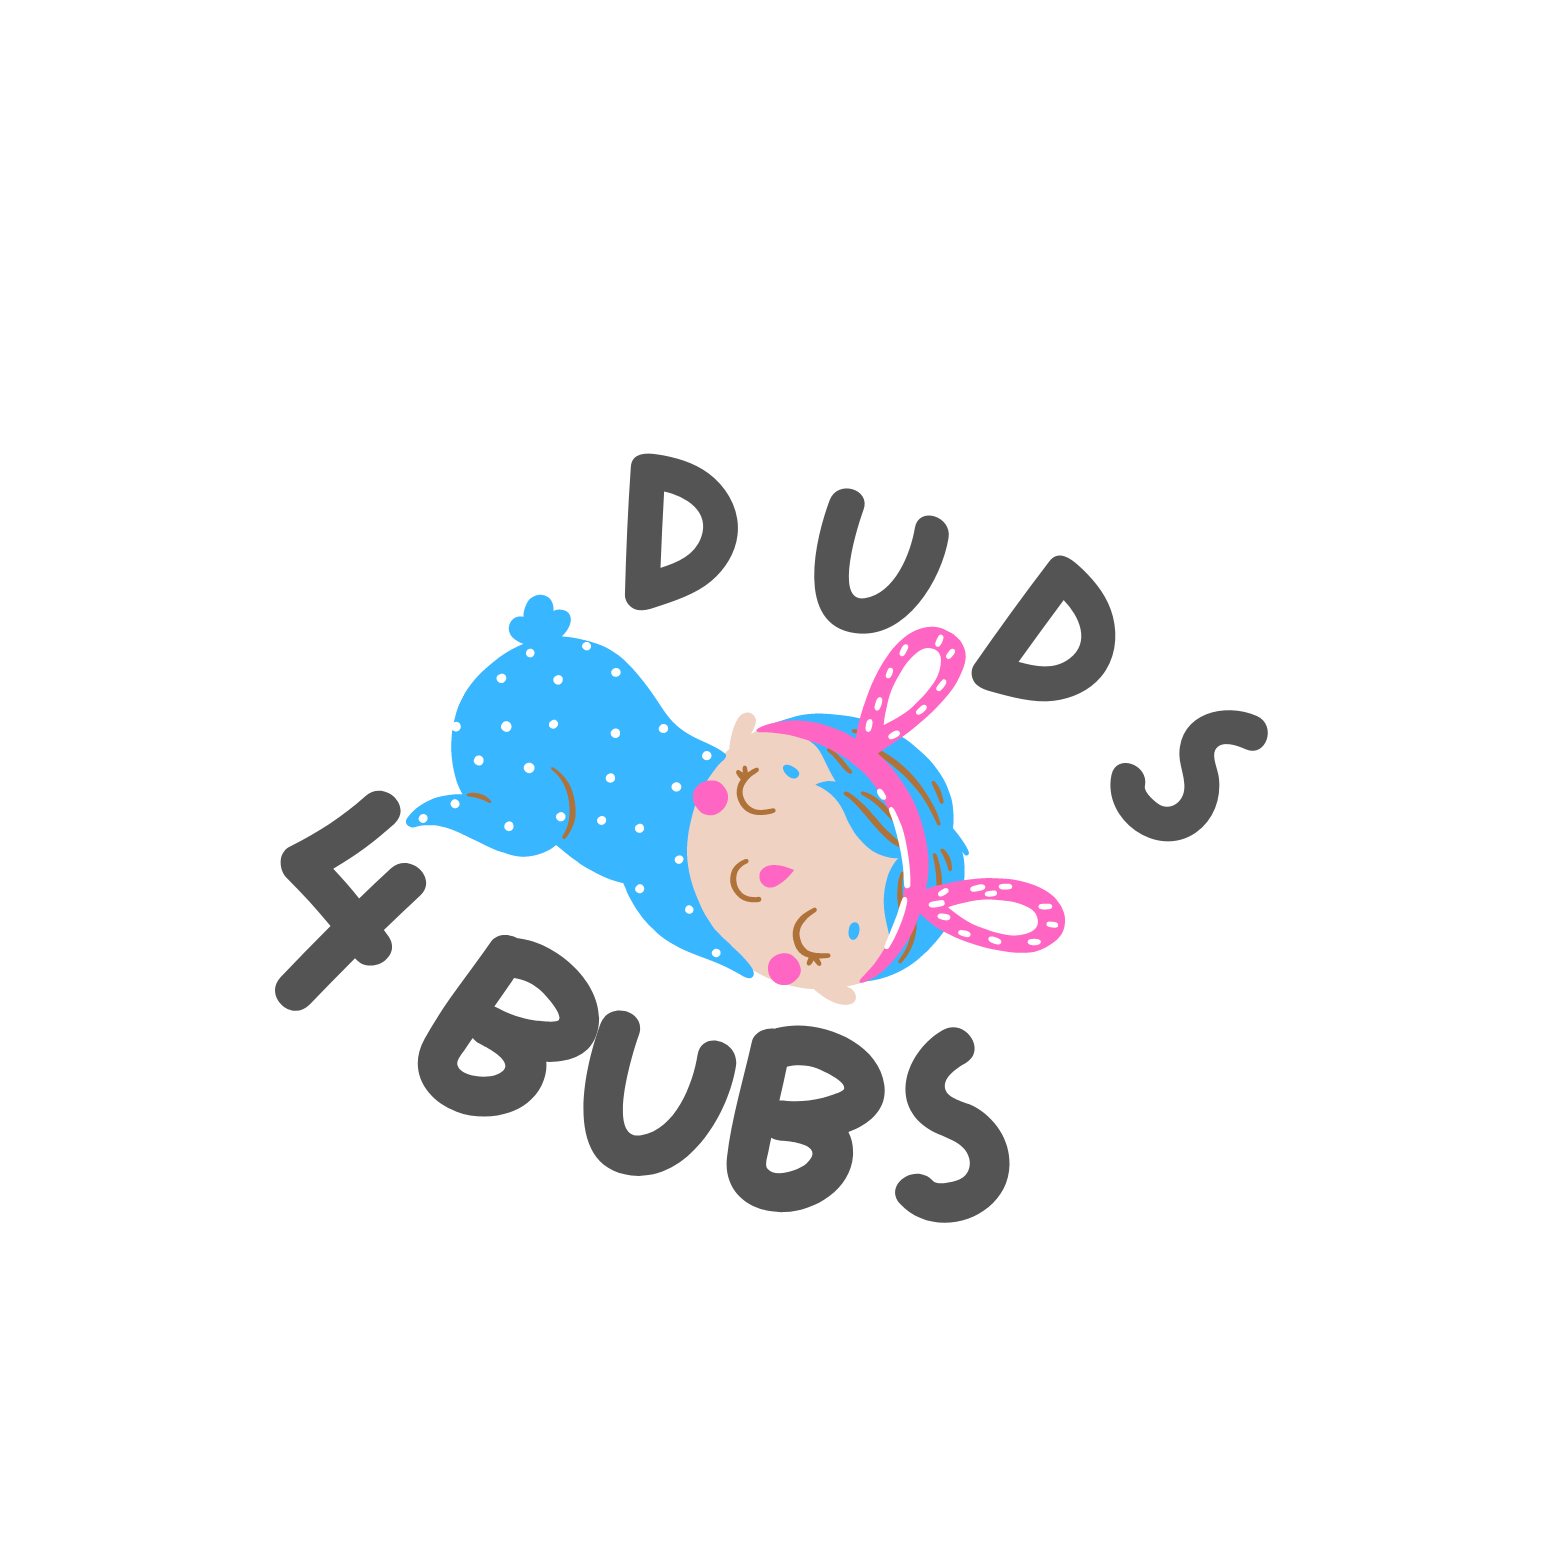 Duds4Bubs